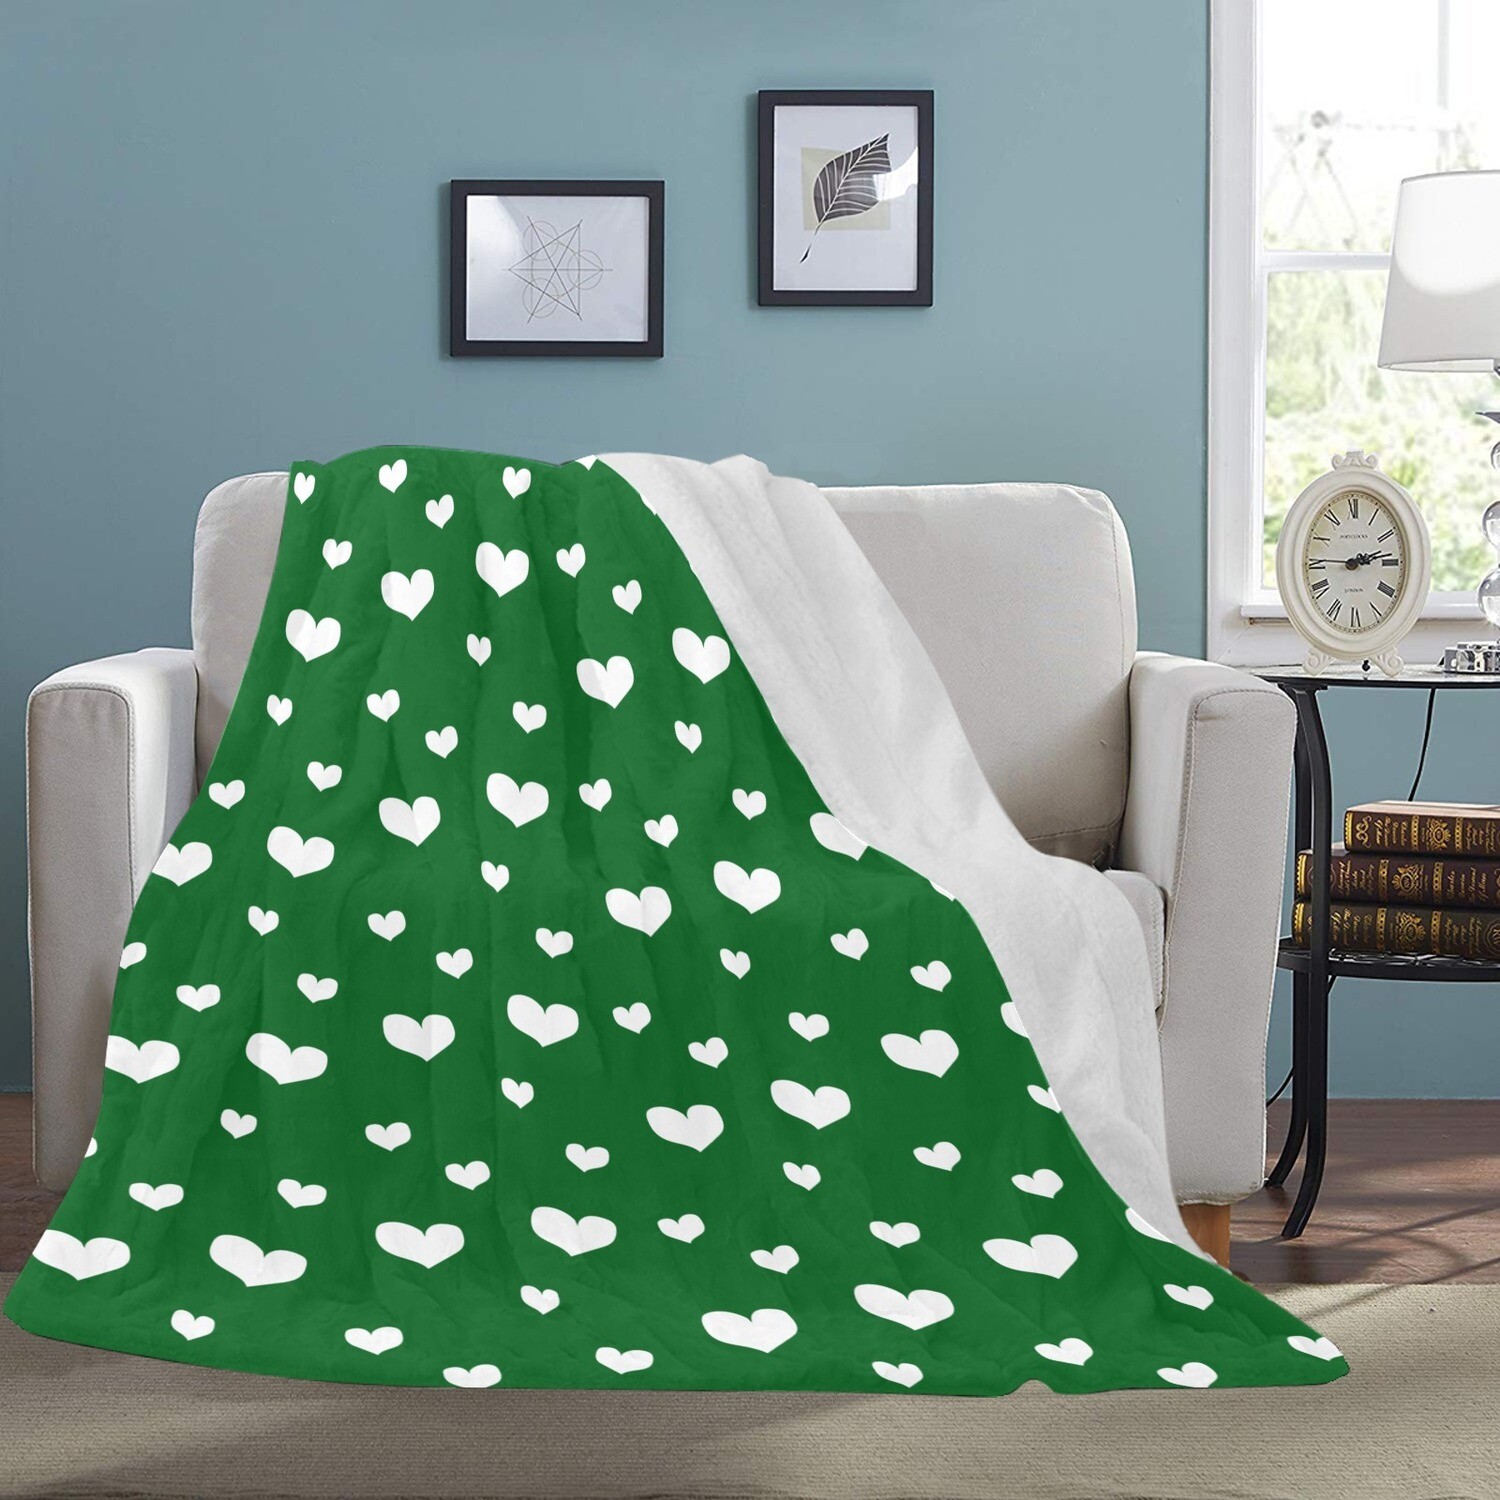 🤴🏽👸🏽💕Large Ultra-Soft Micro Fleece Blanket Valentine white hearts on forest green, gift, gift for her, gift for him, gift for them, 70"x80"